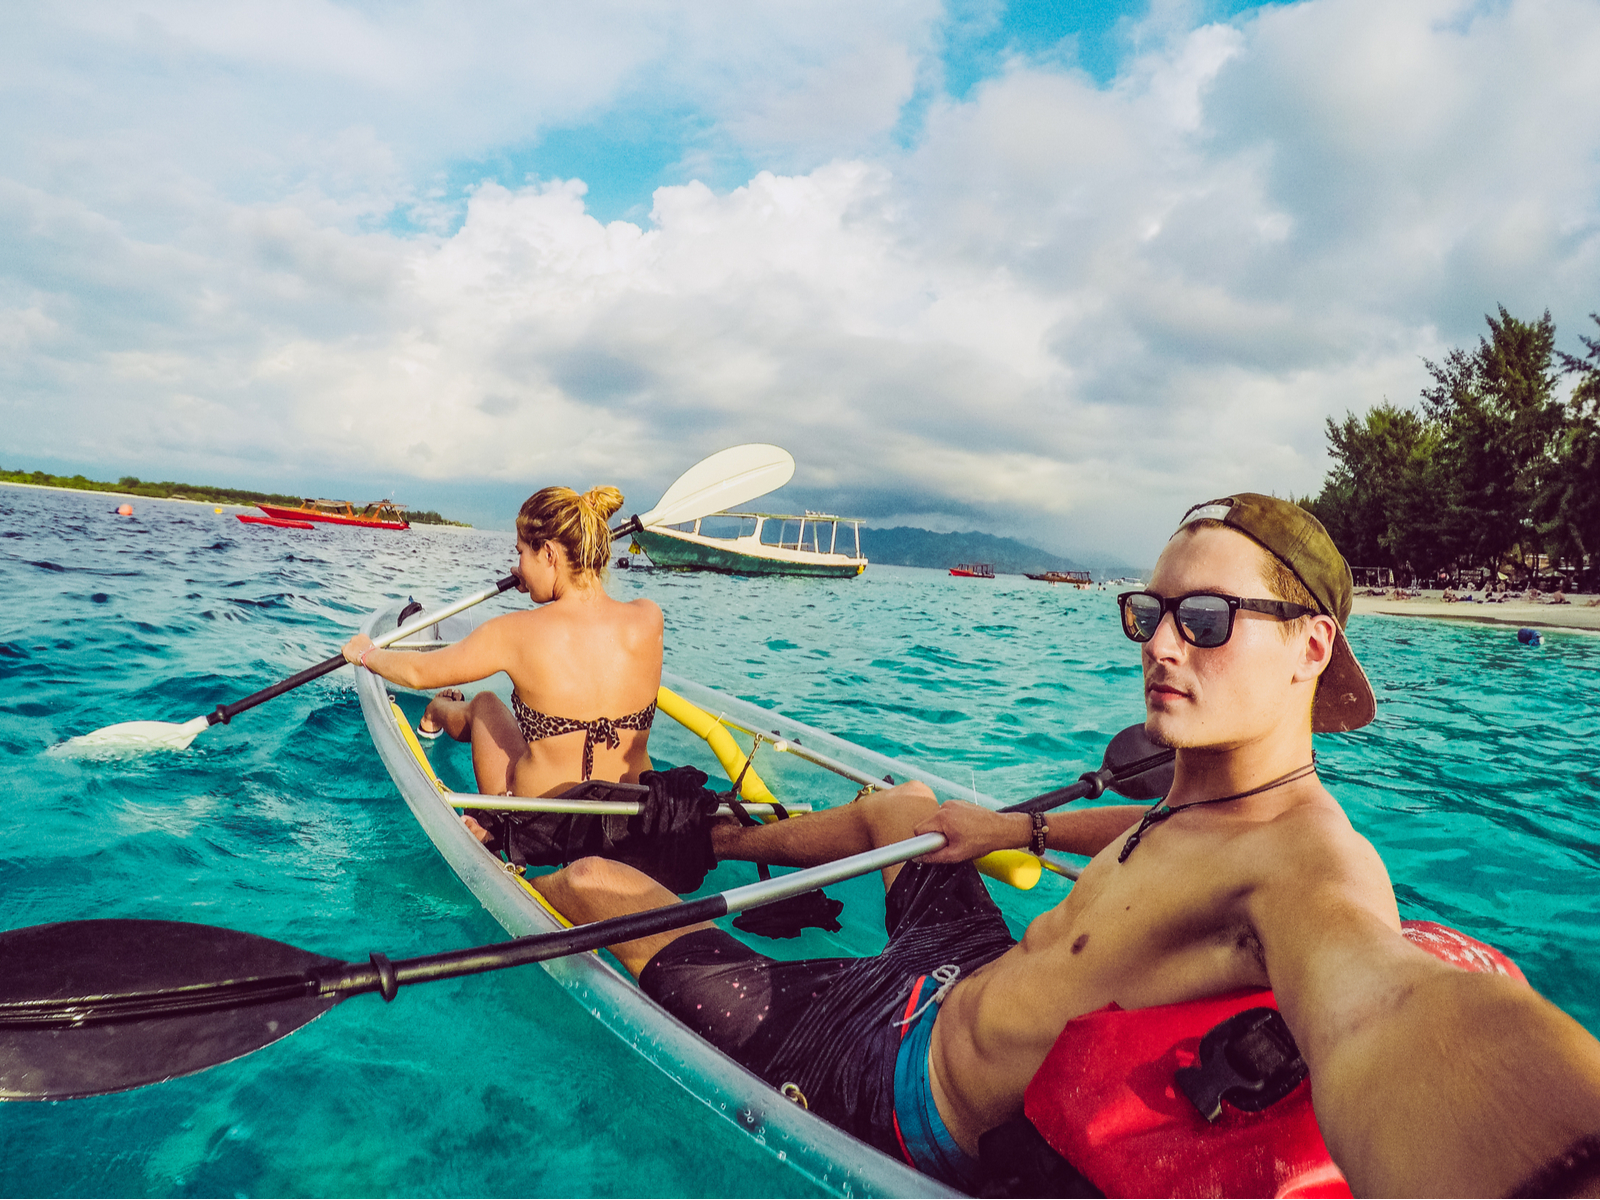 Couple in a kayak paddling on the ocean while the guy holds one of the best GoPro alternatives